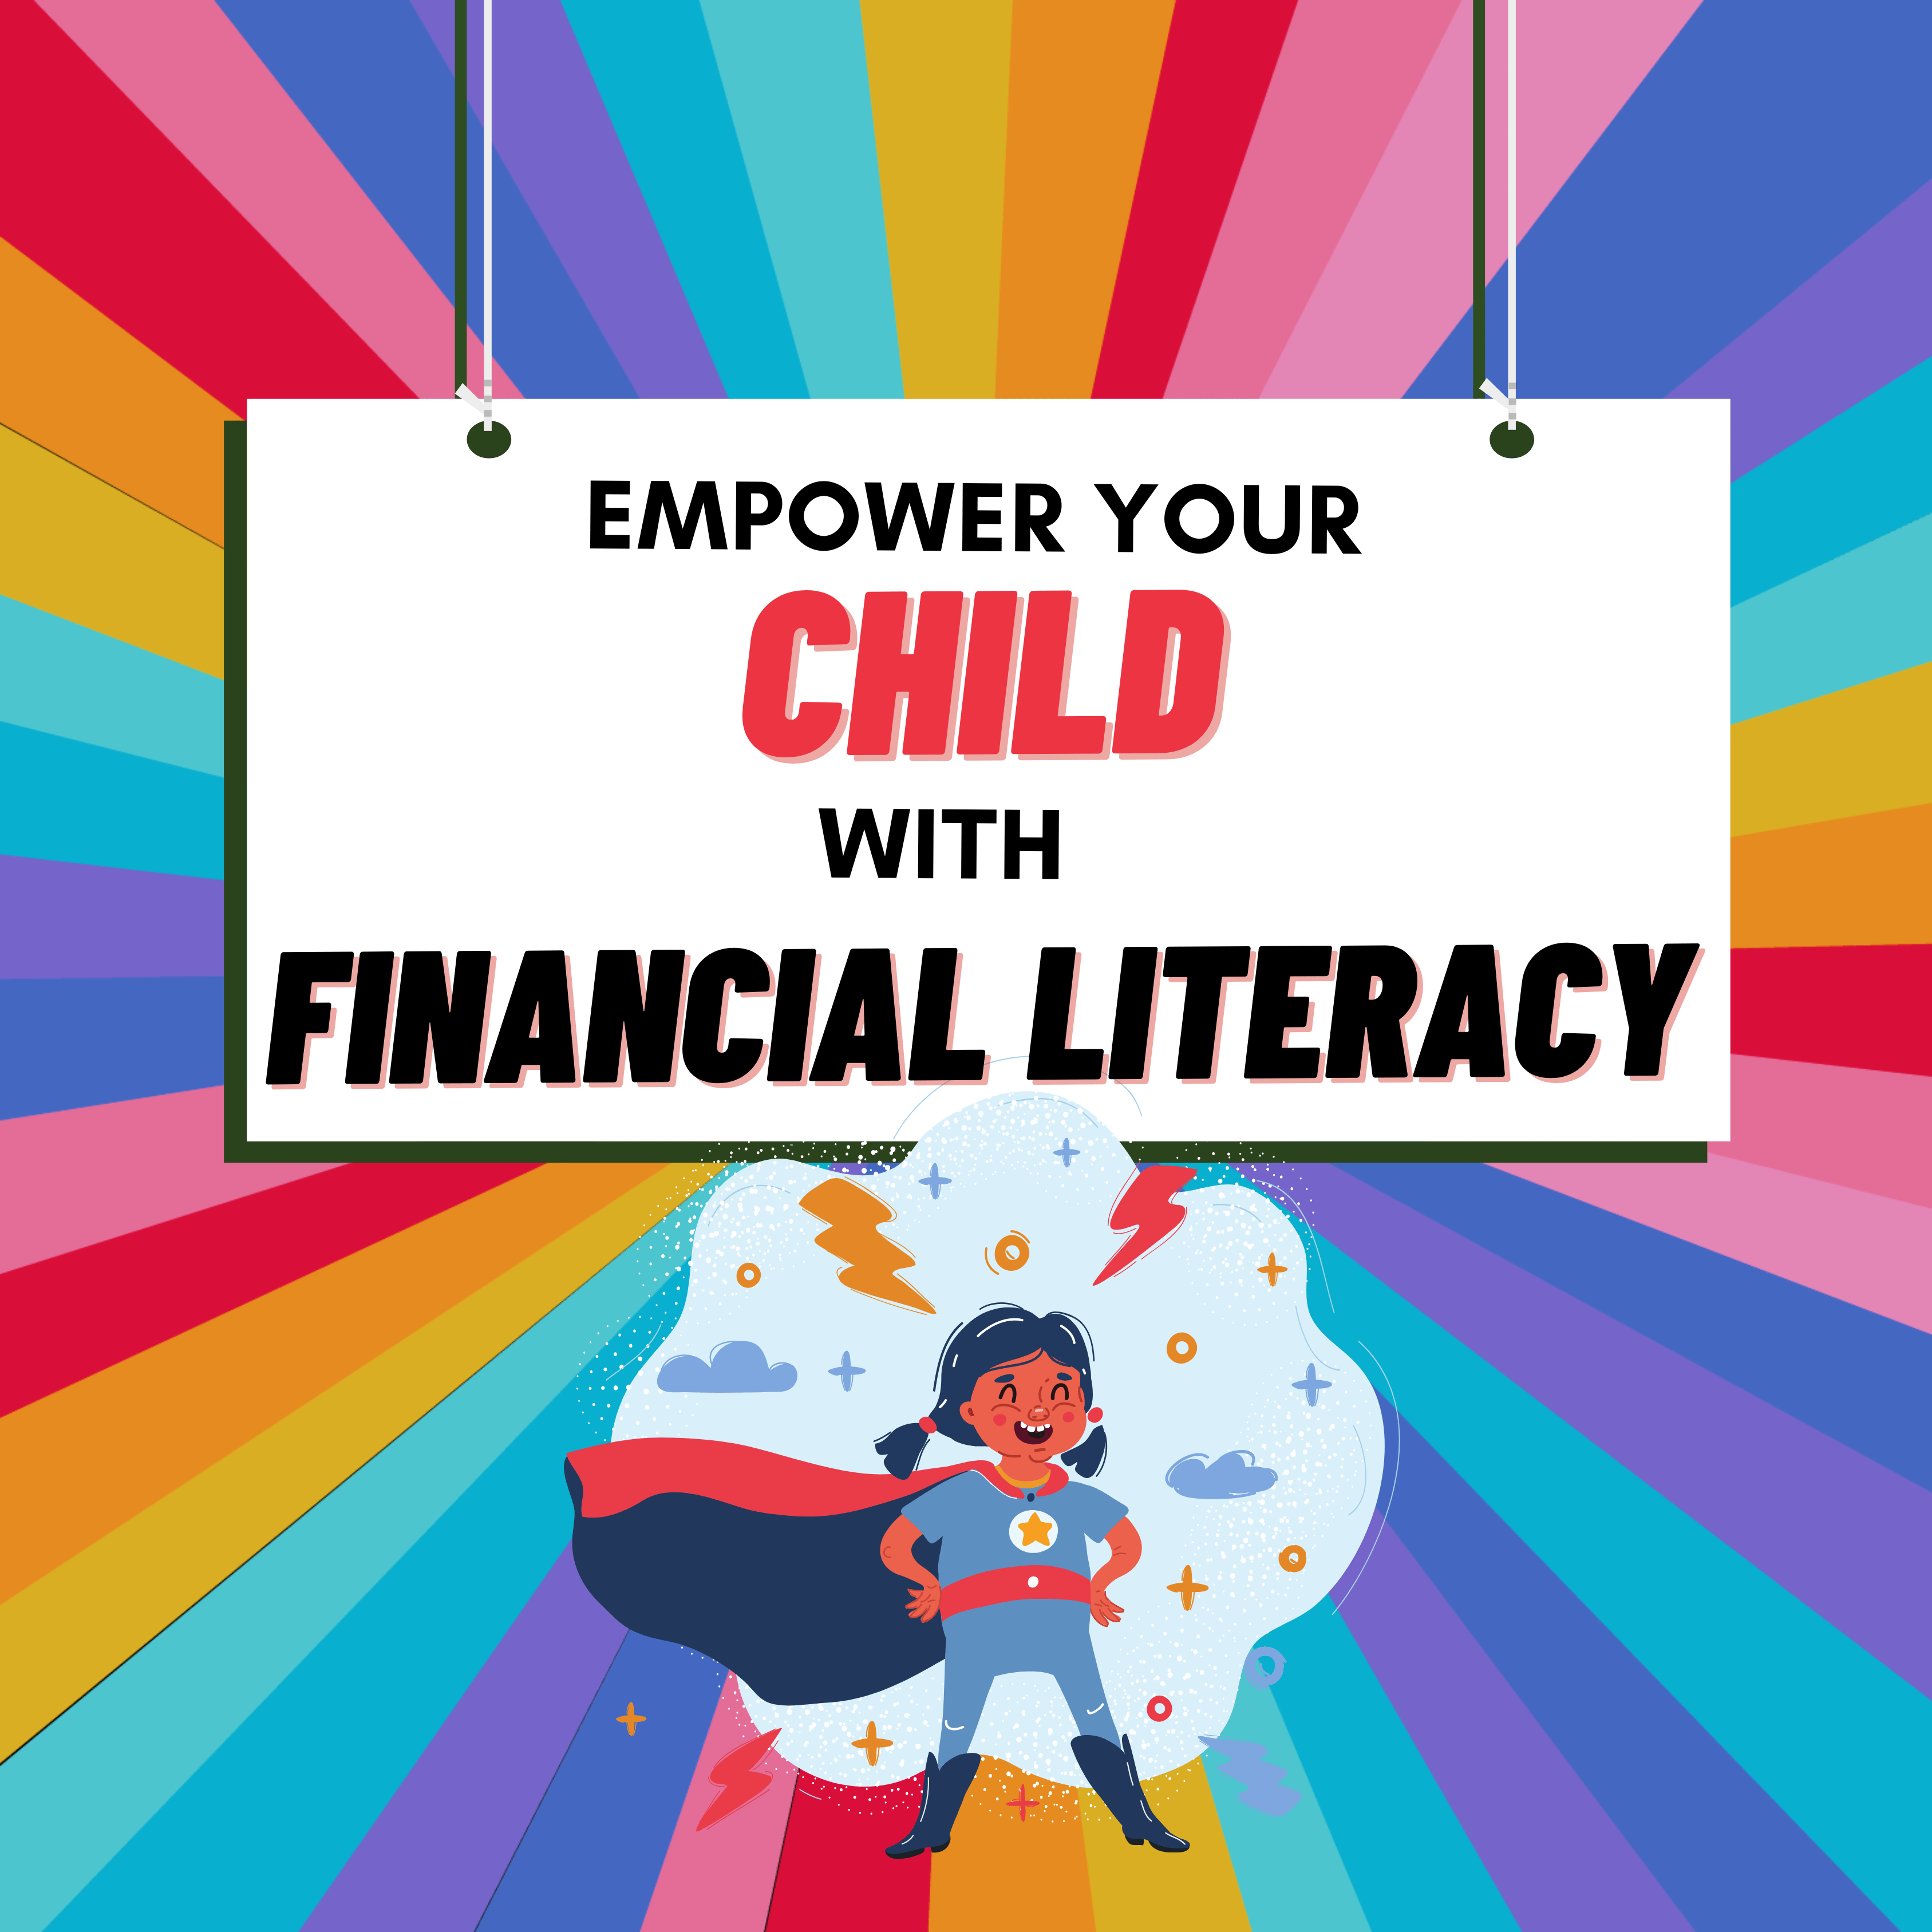 EMPOWER YOUR CHILD WITH FINANCIAL LITERACY